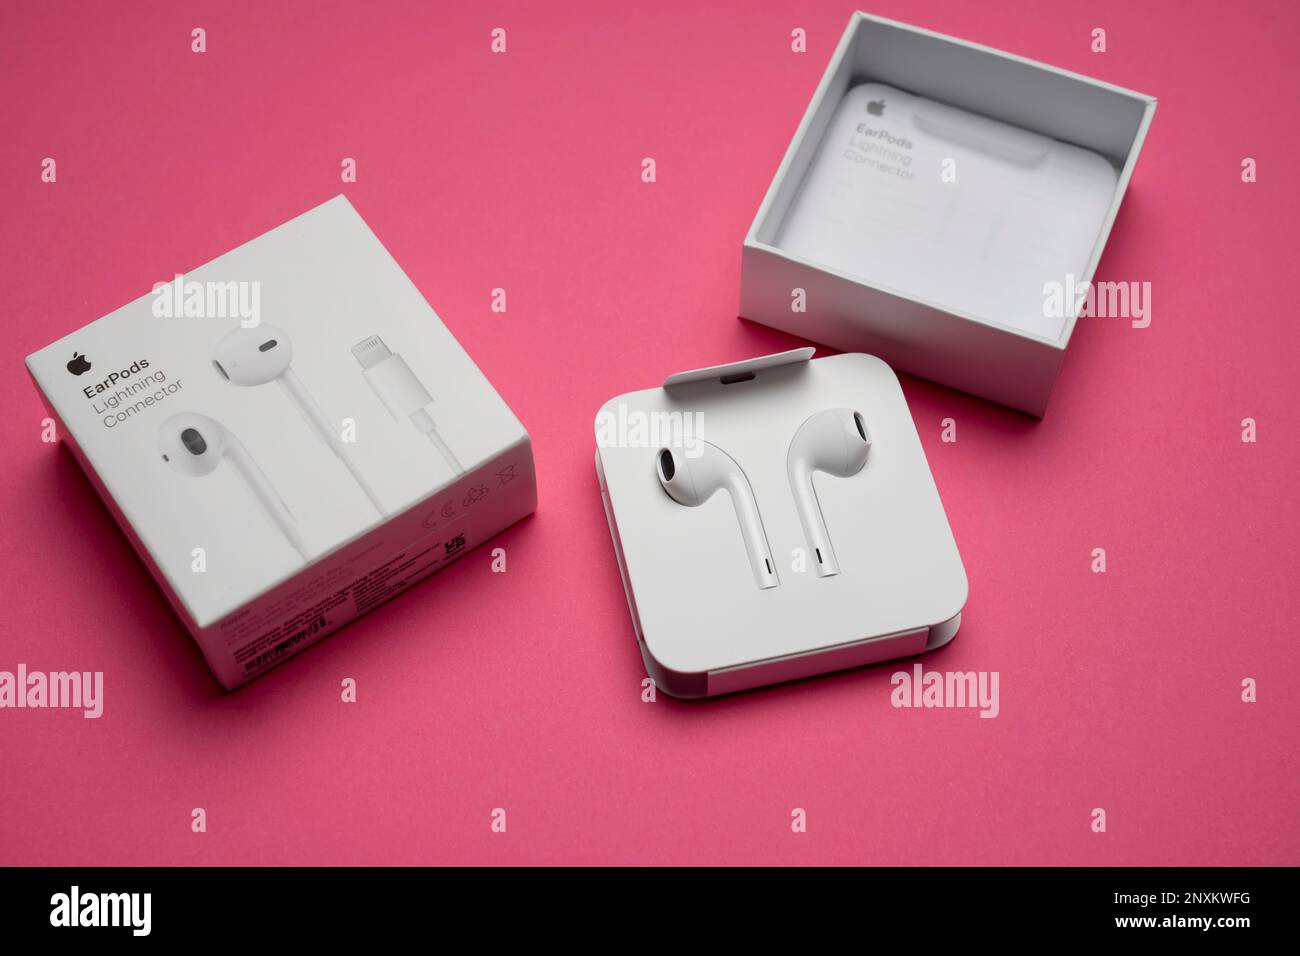 New Apple Earpods, Airpods white earphones for listening to music and podcasts in an open box. Isolated pink background. Budapest, Hungary - February Stock Photo